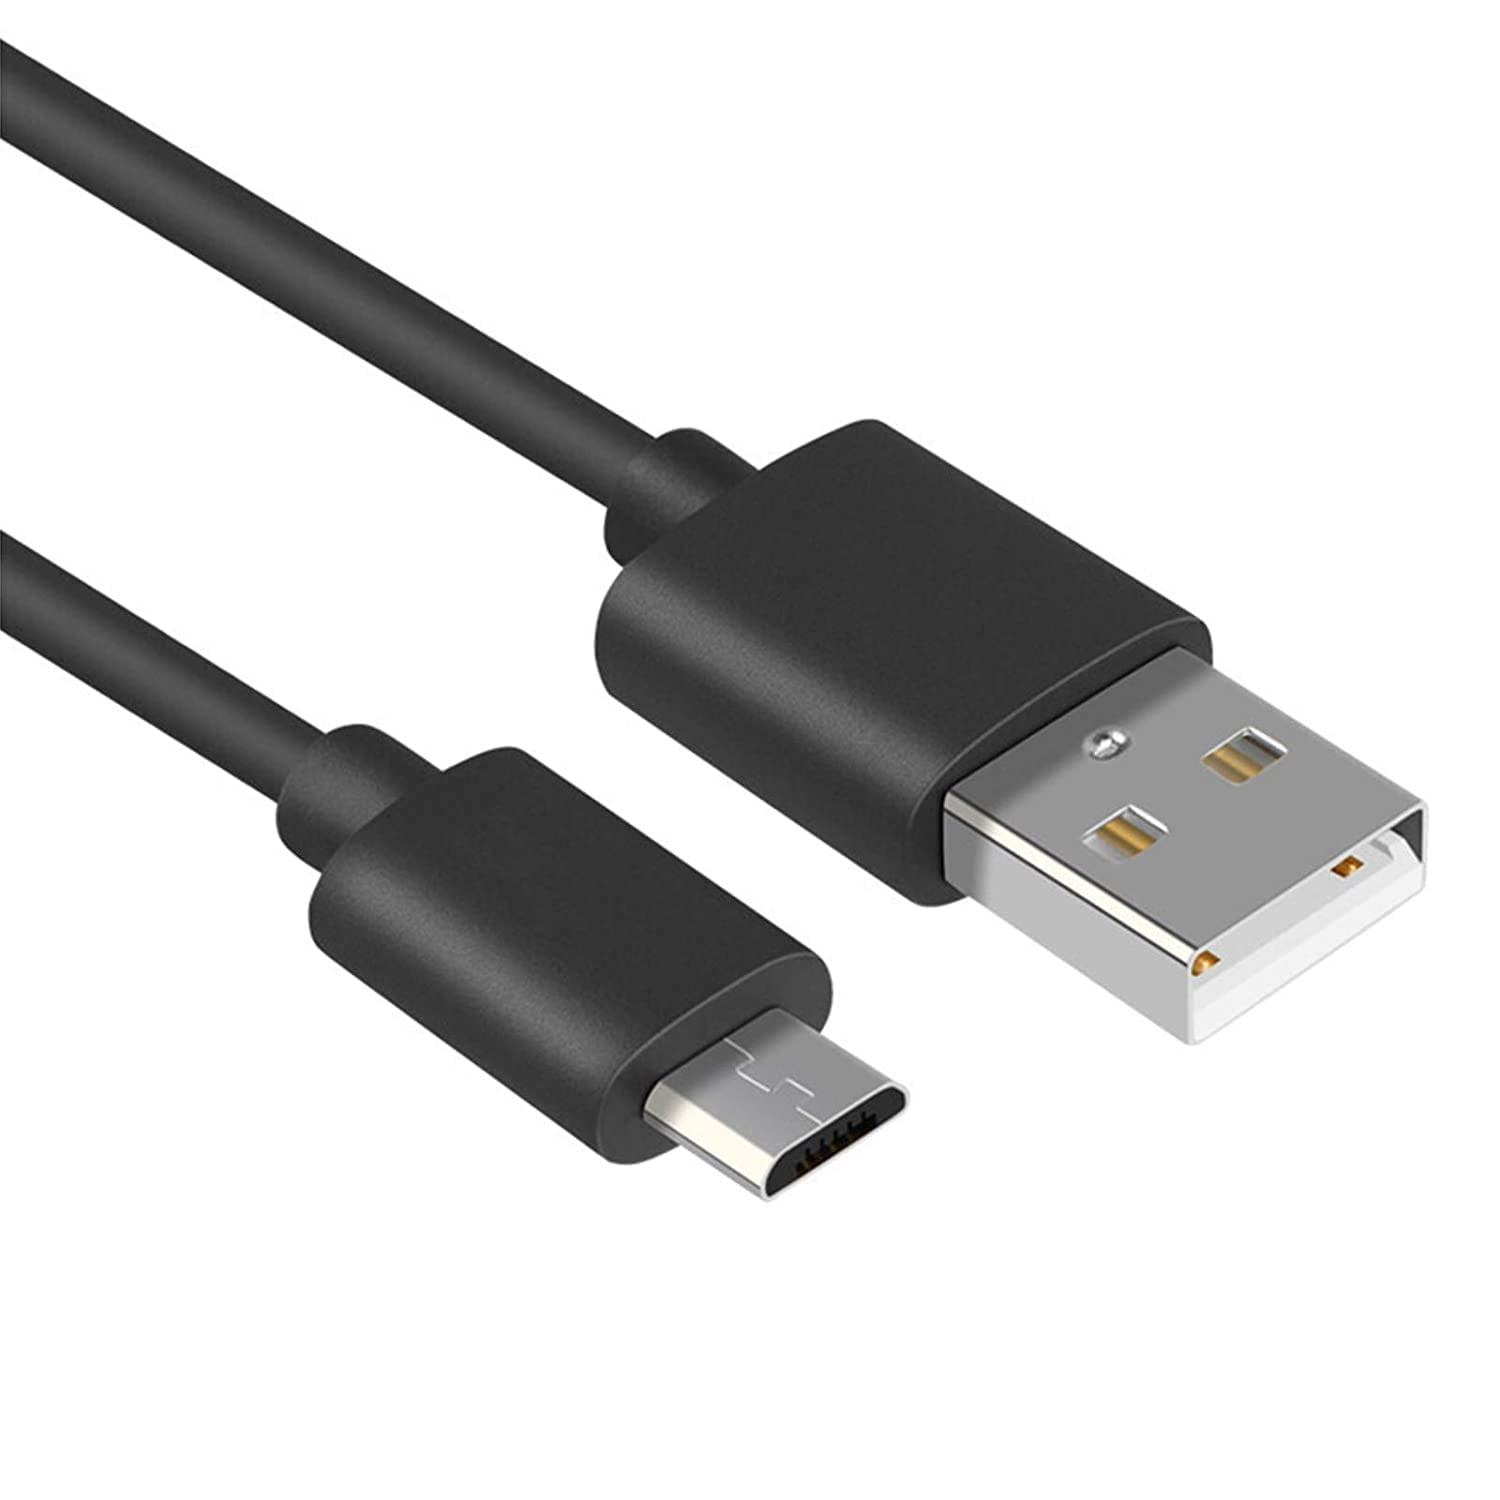 USB CONNECT TO PC COMPUTER POWER CHARGER CABLE CORD FOR LOGITECH KEYBOARDS HTPC 